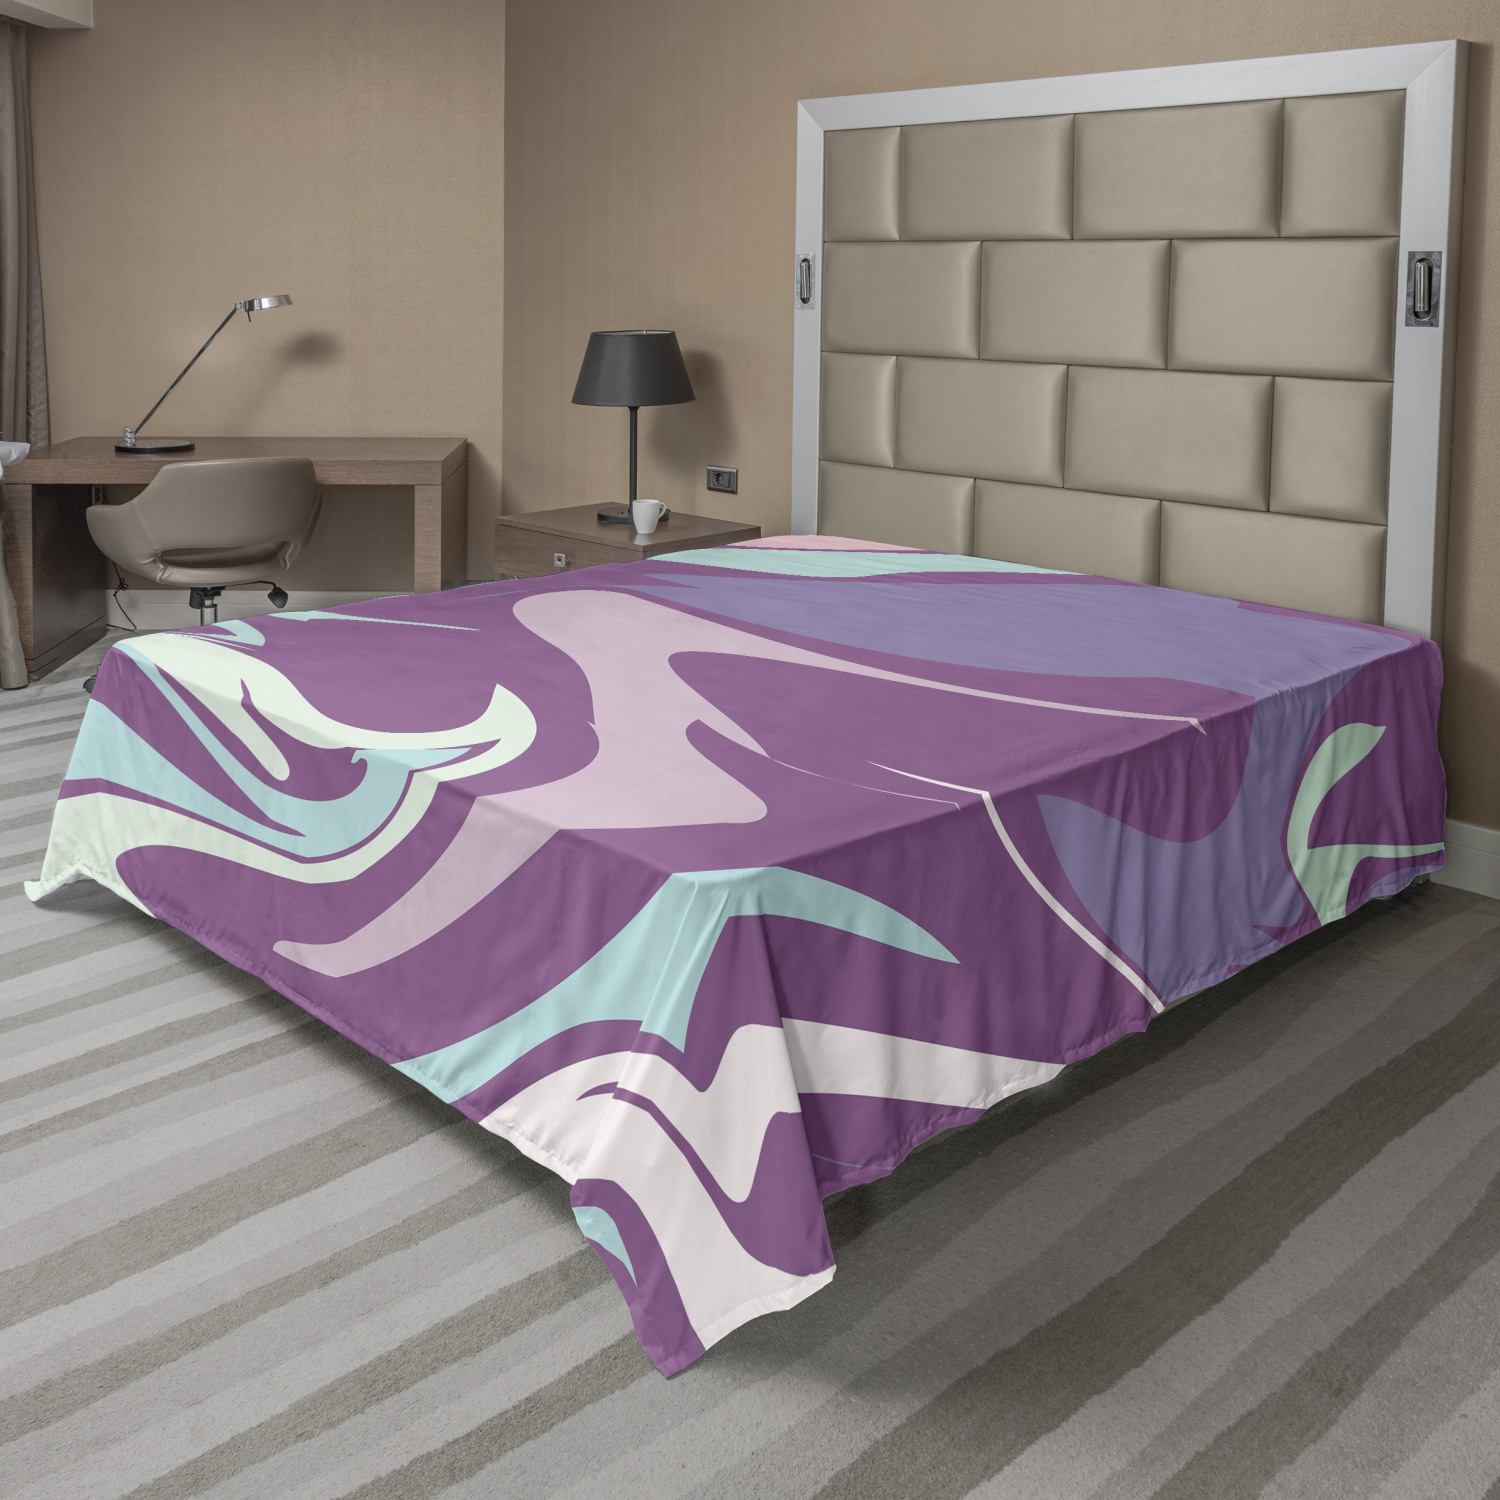 Details about   Ambesonne Grunge Abstract Flat Sheet Top Sheet Decorative Bedding 6 Sizes 